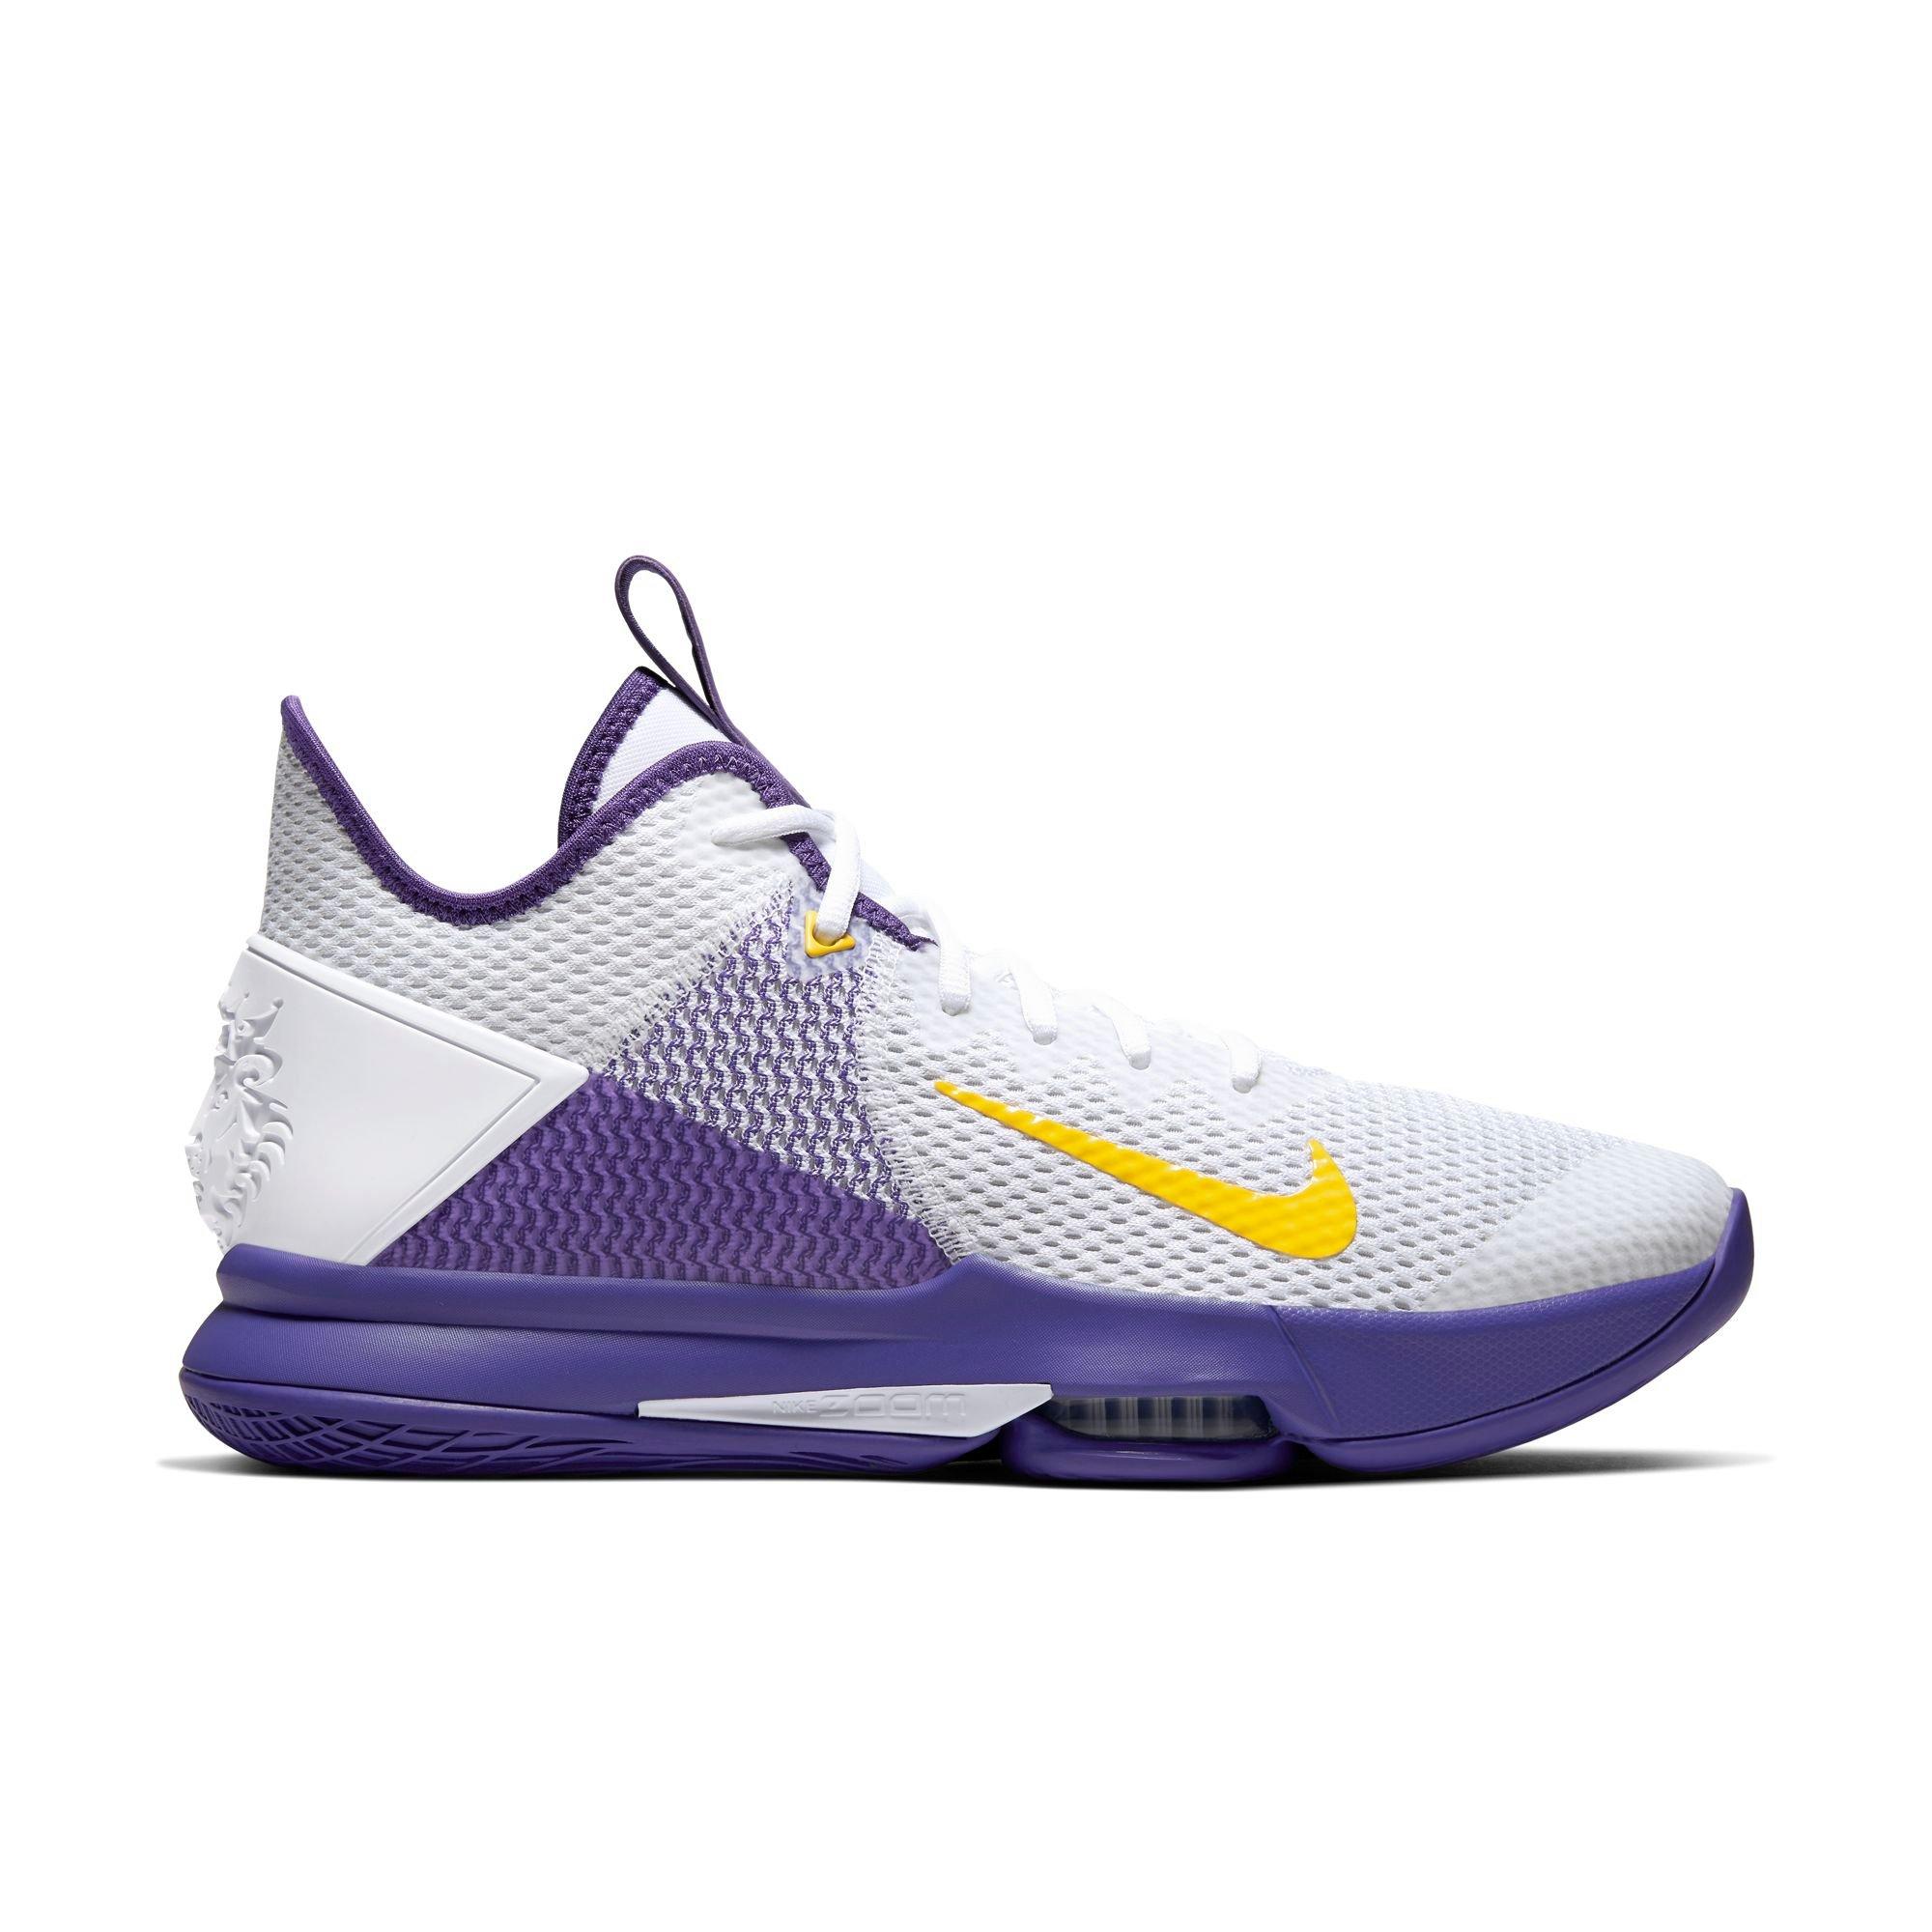 lebron james shoes white and purple